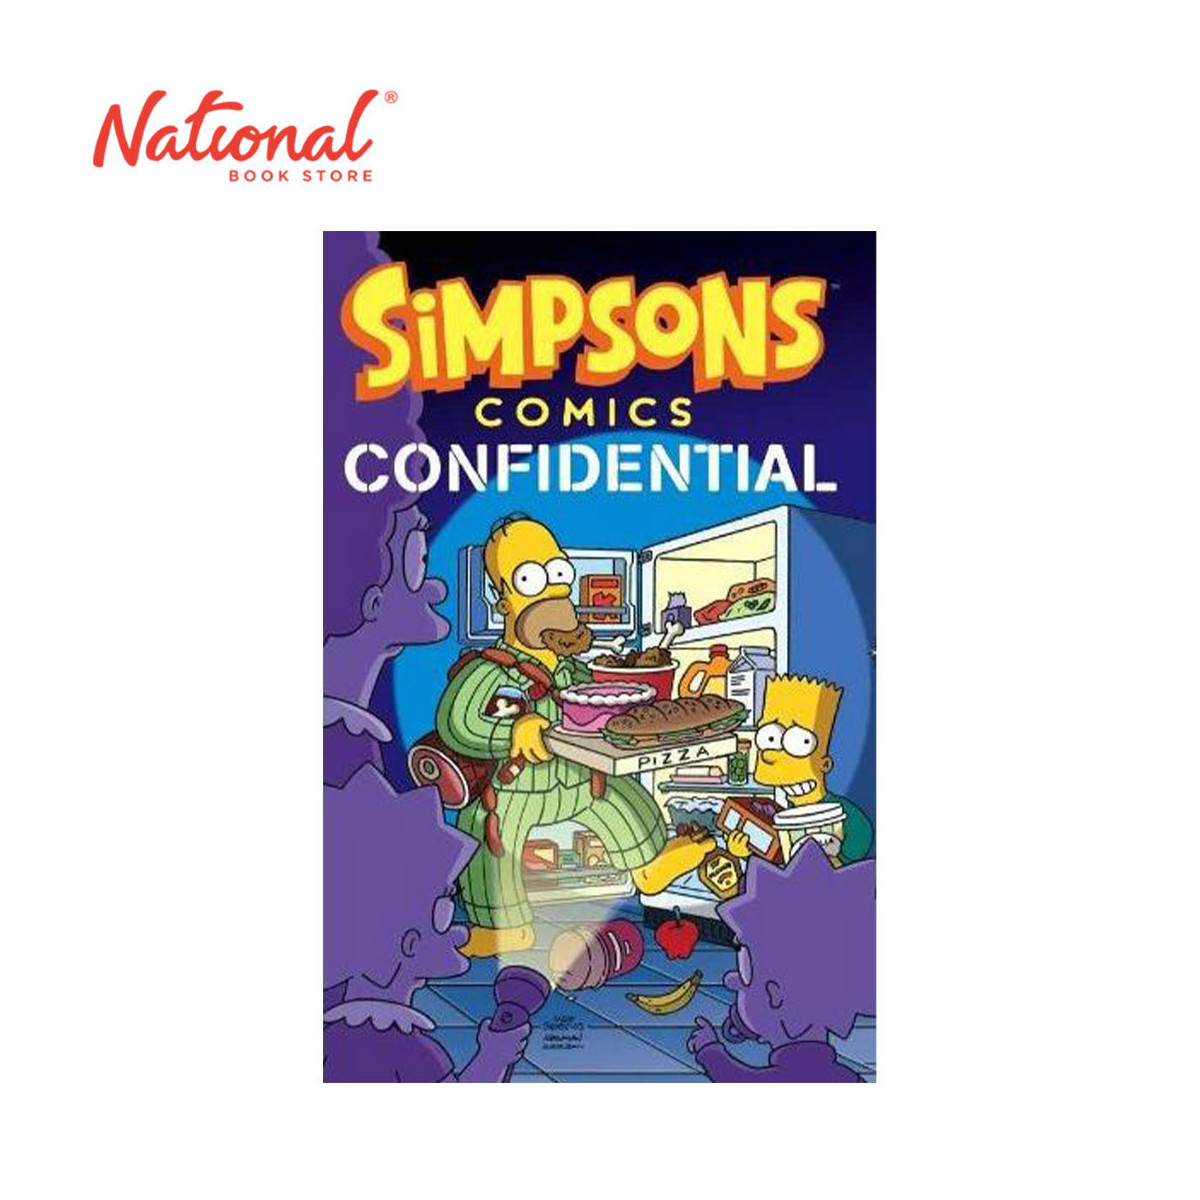 Simpsons Comics: Confidential by Matt Groening - Trade Paperback - Graphic Novels